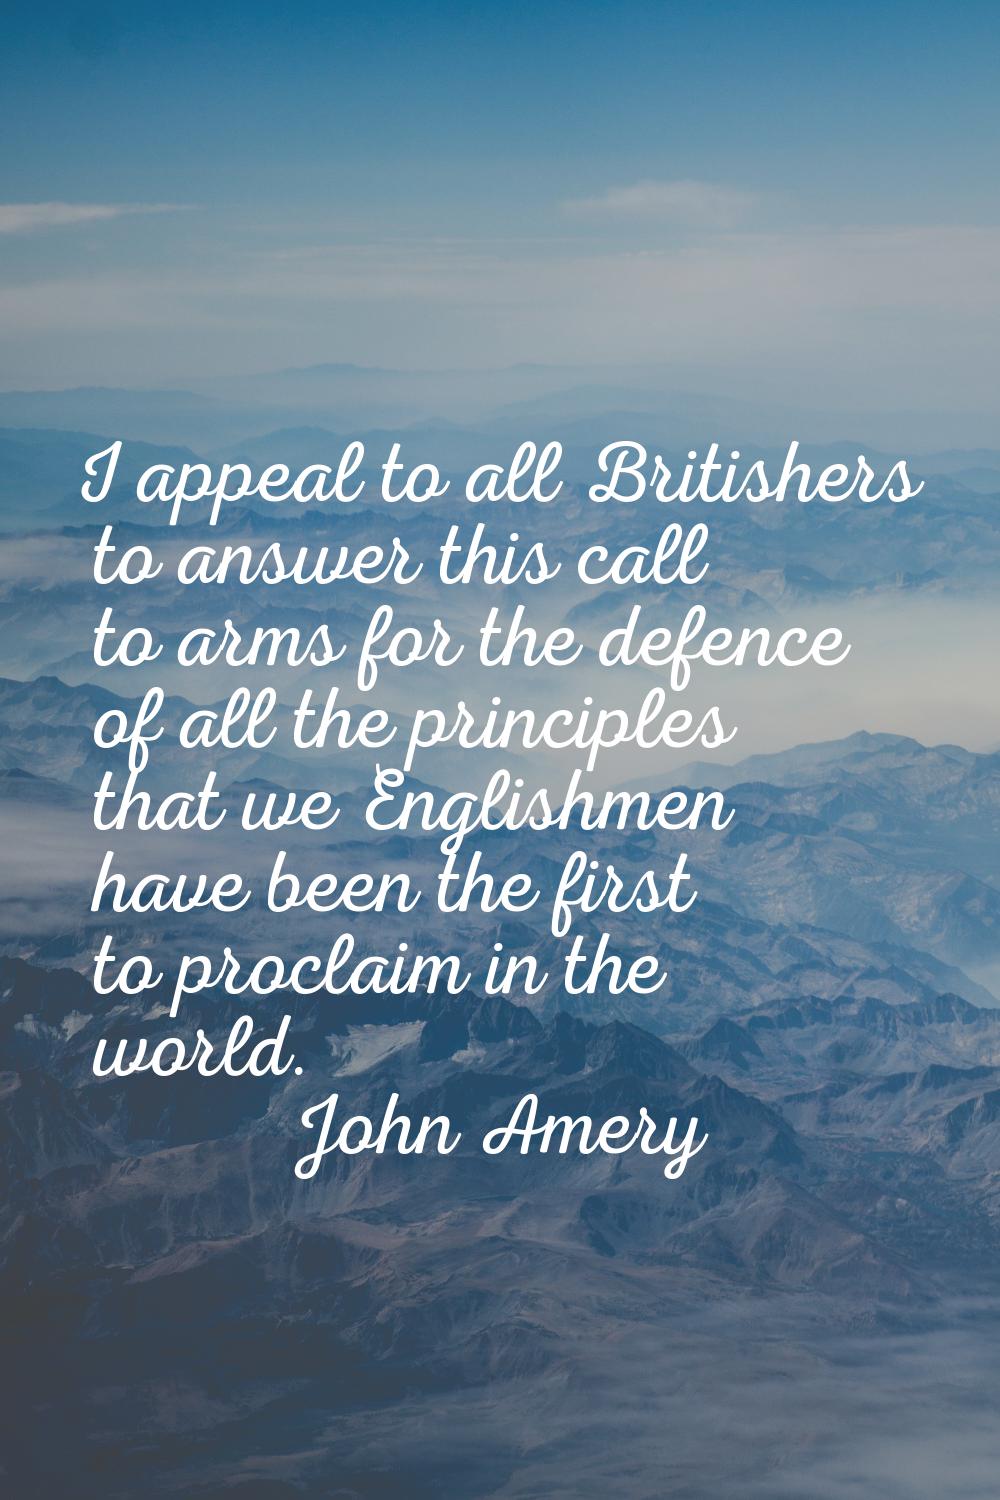 I appeal to all Britishers to answer this call to arms for the defence of all the principles that w